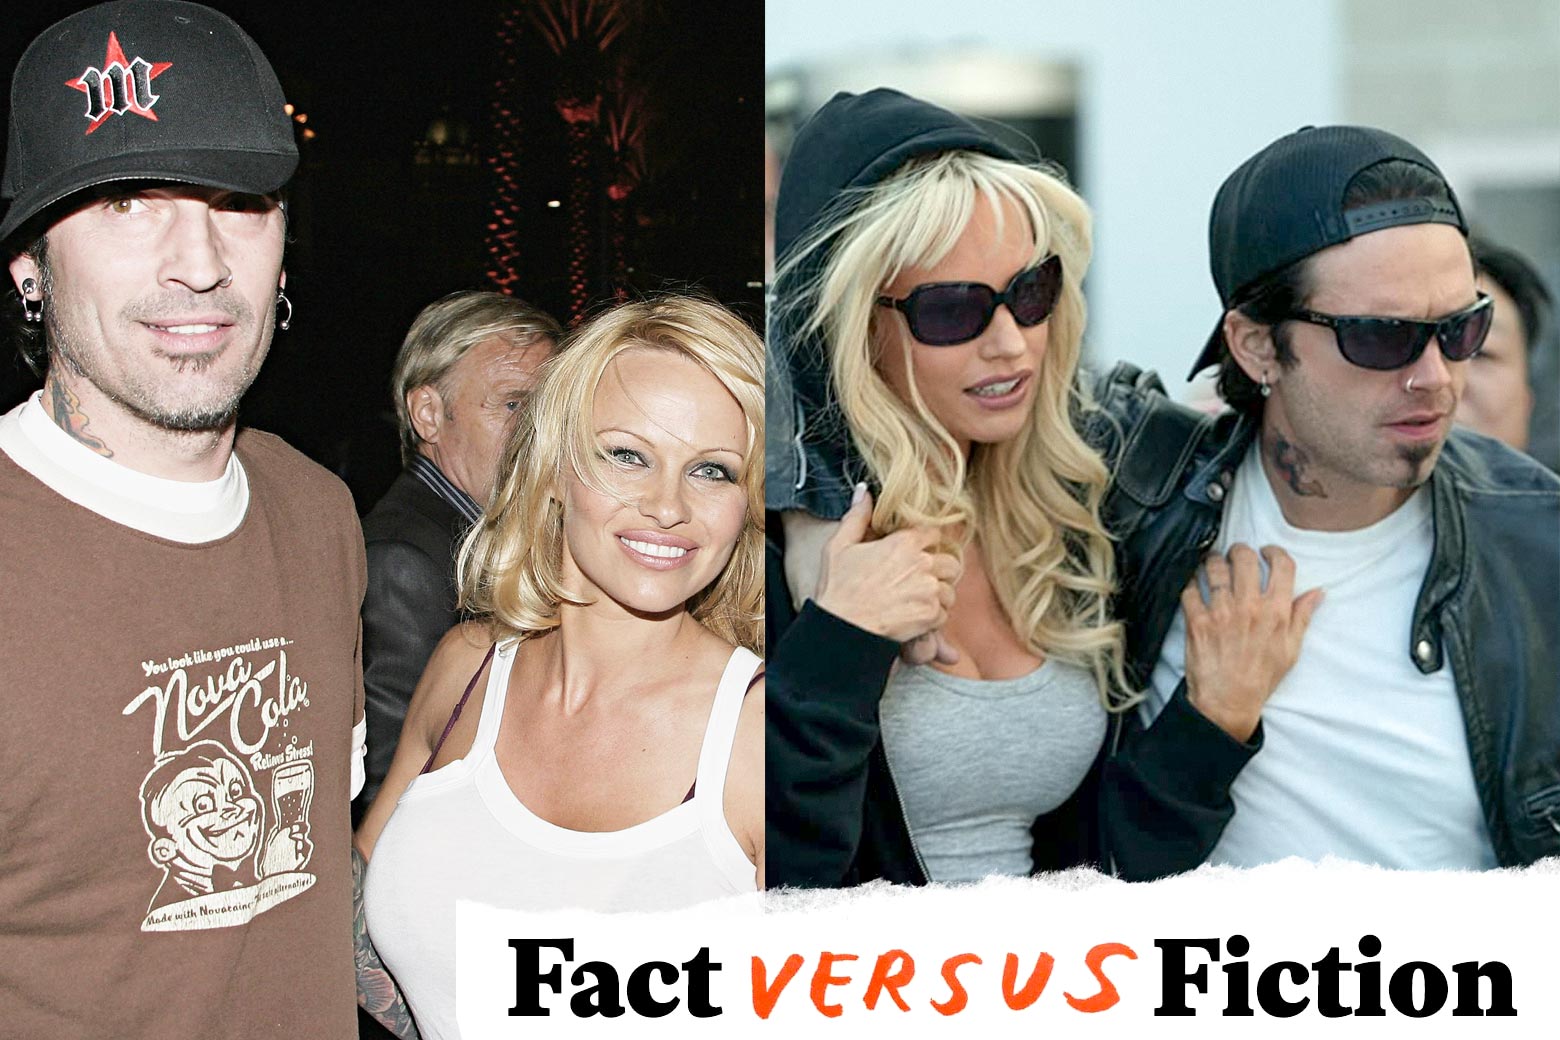 Pam and Tommy accuracy whats fact and whats fiction in the Hulu miniseries about Pamela Anderson and Tommy Lee. picture photo